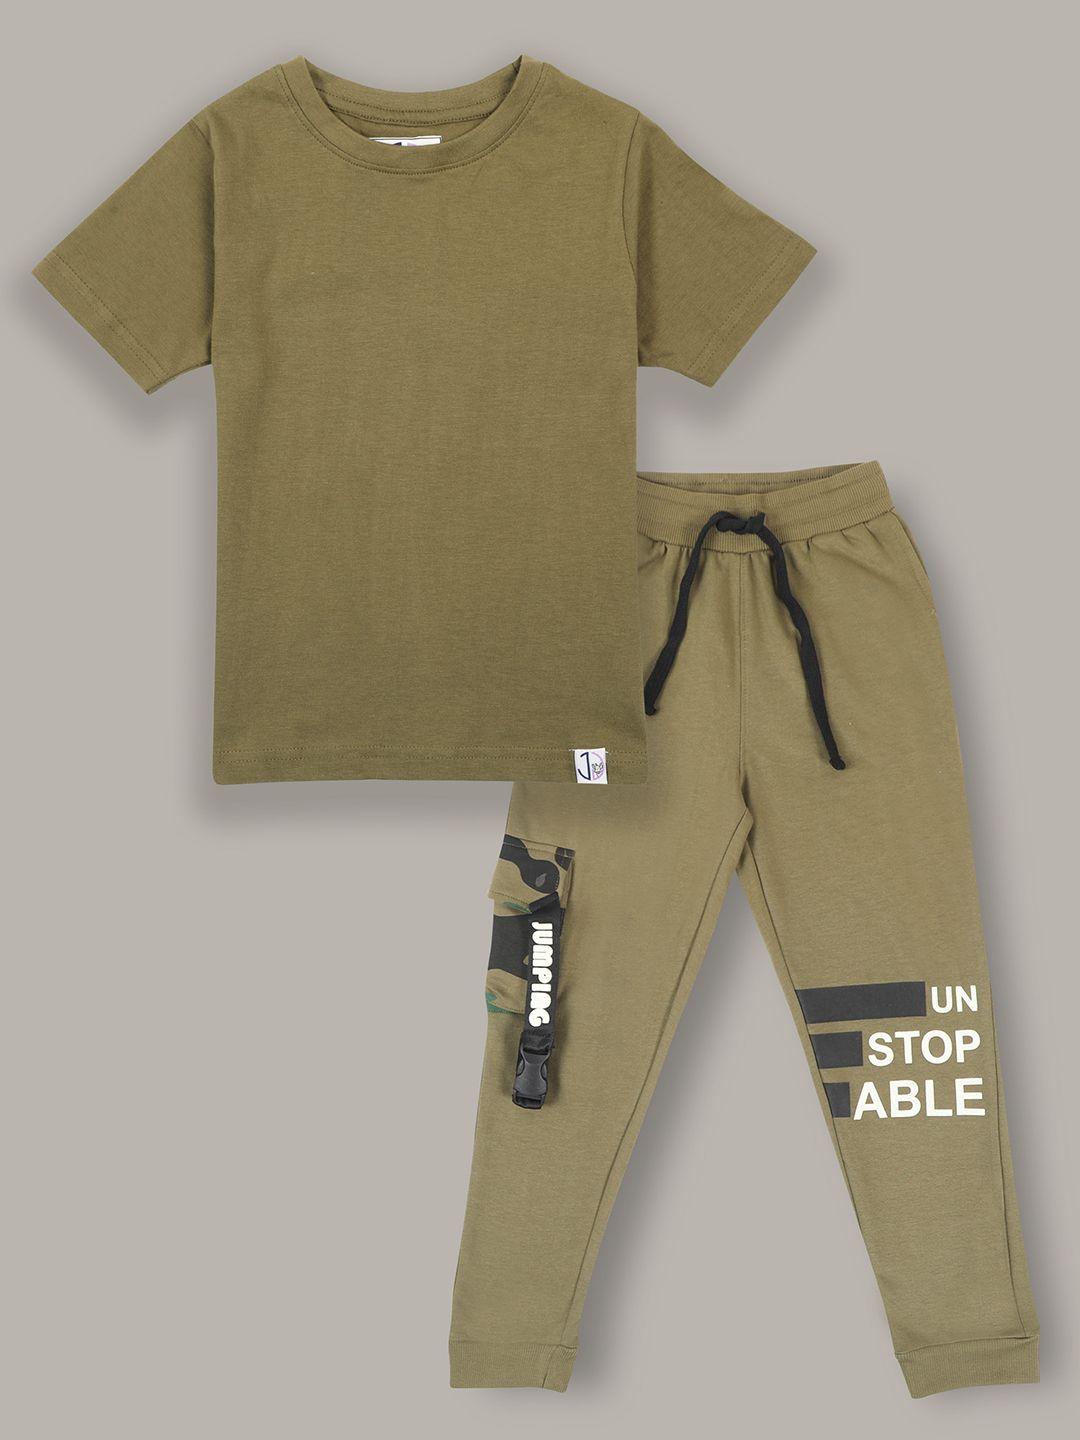 jumping joey boys olive green & white t-shirt with trousers